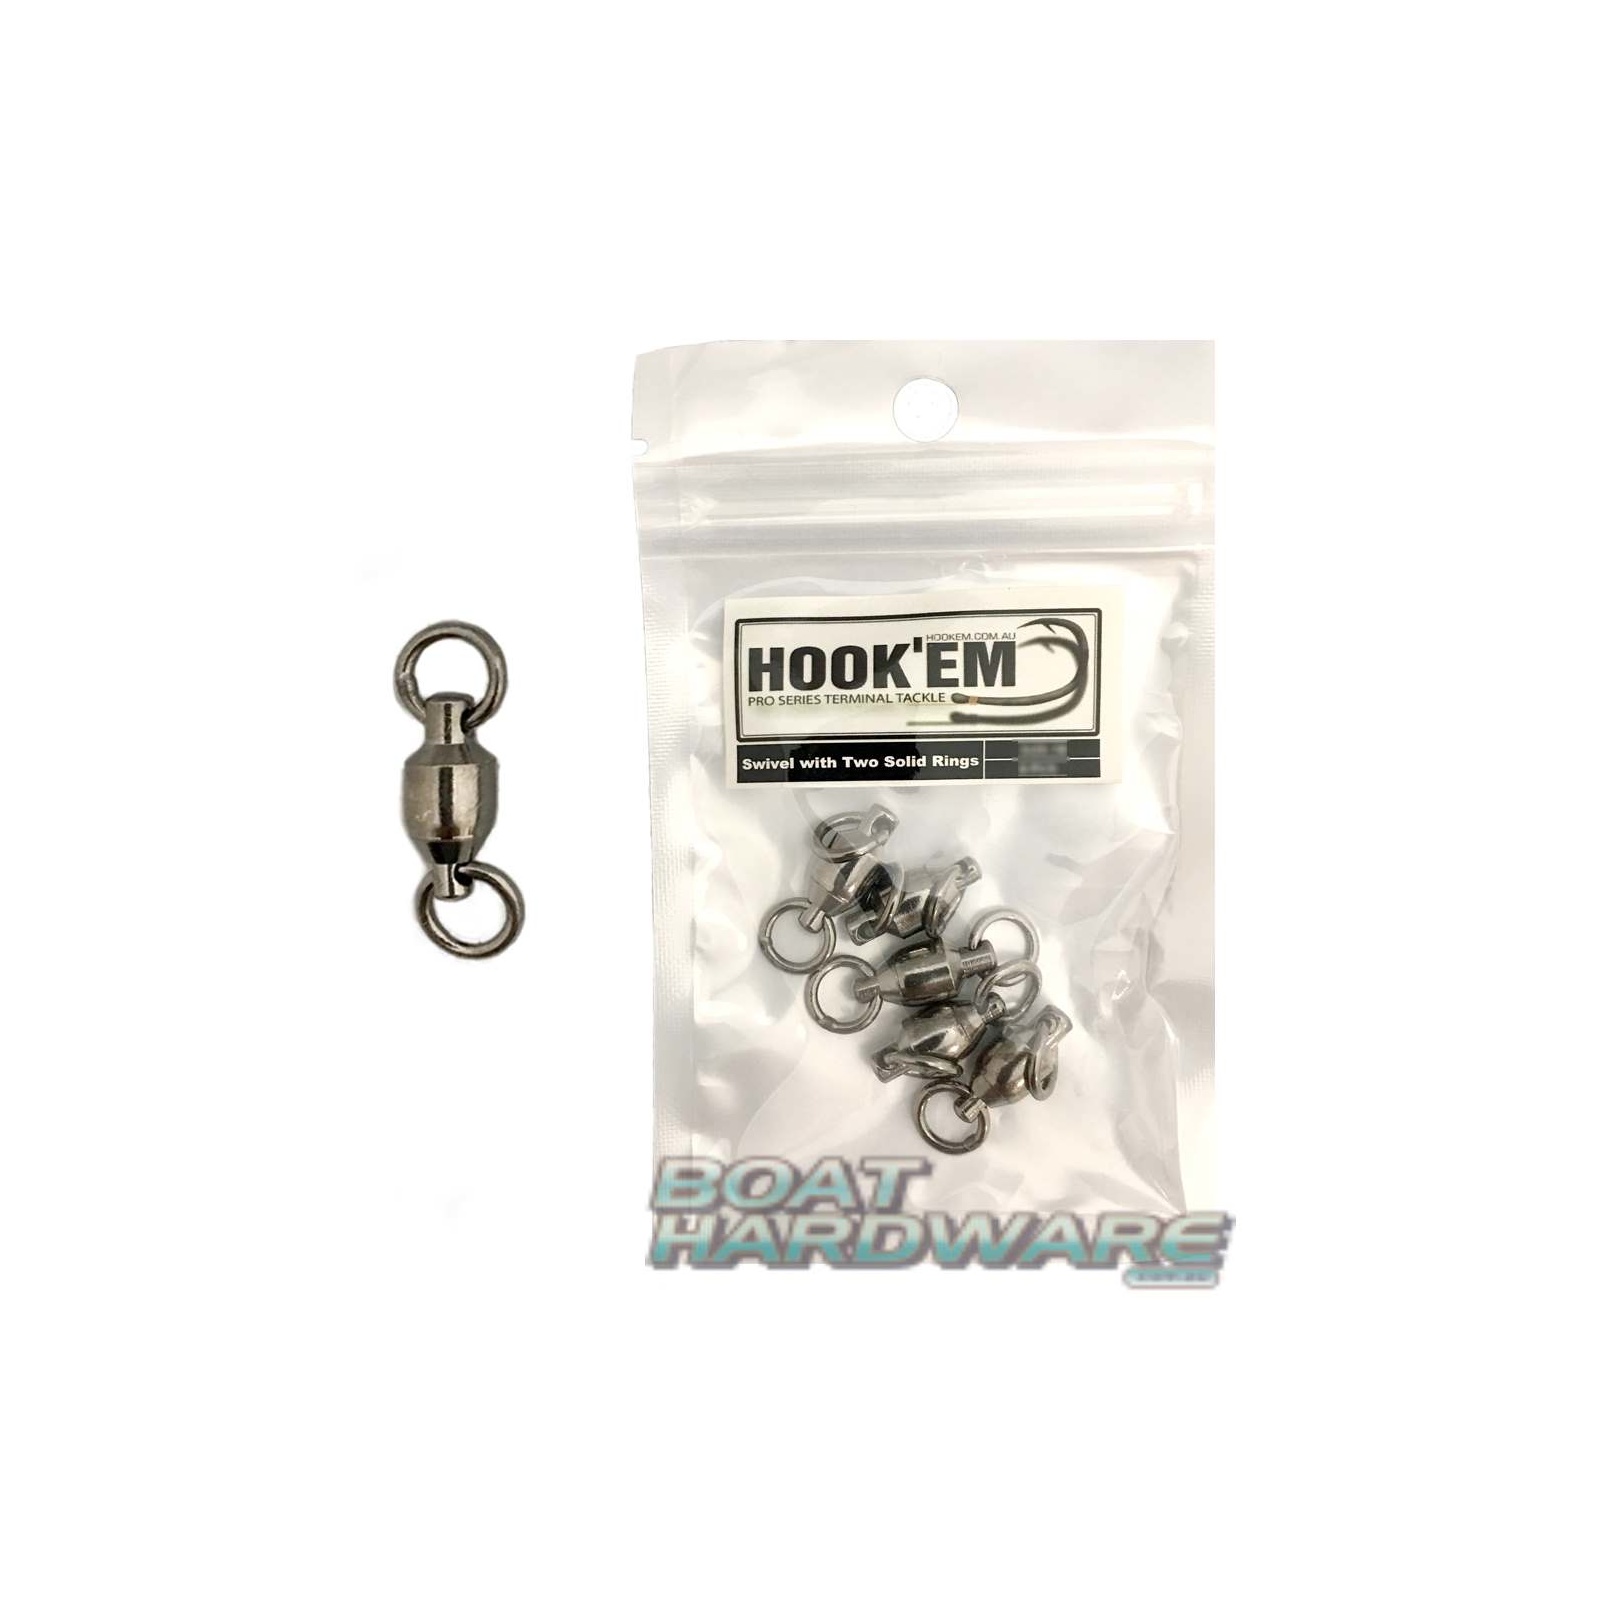 Size 7 Ball Bearing Swivel - 2 Solid Rings (Pack of 6)